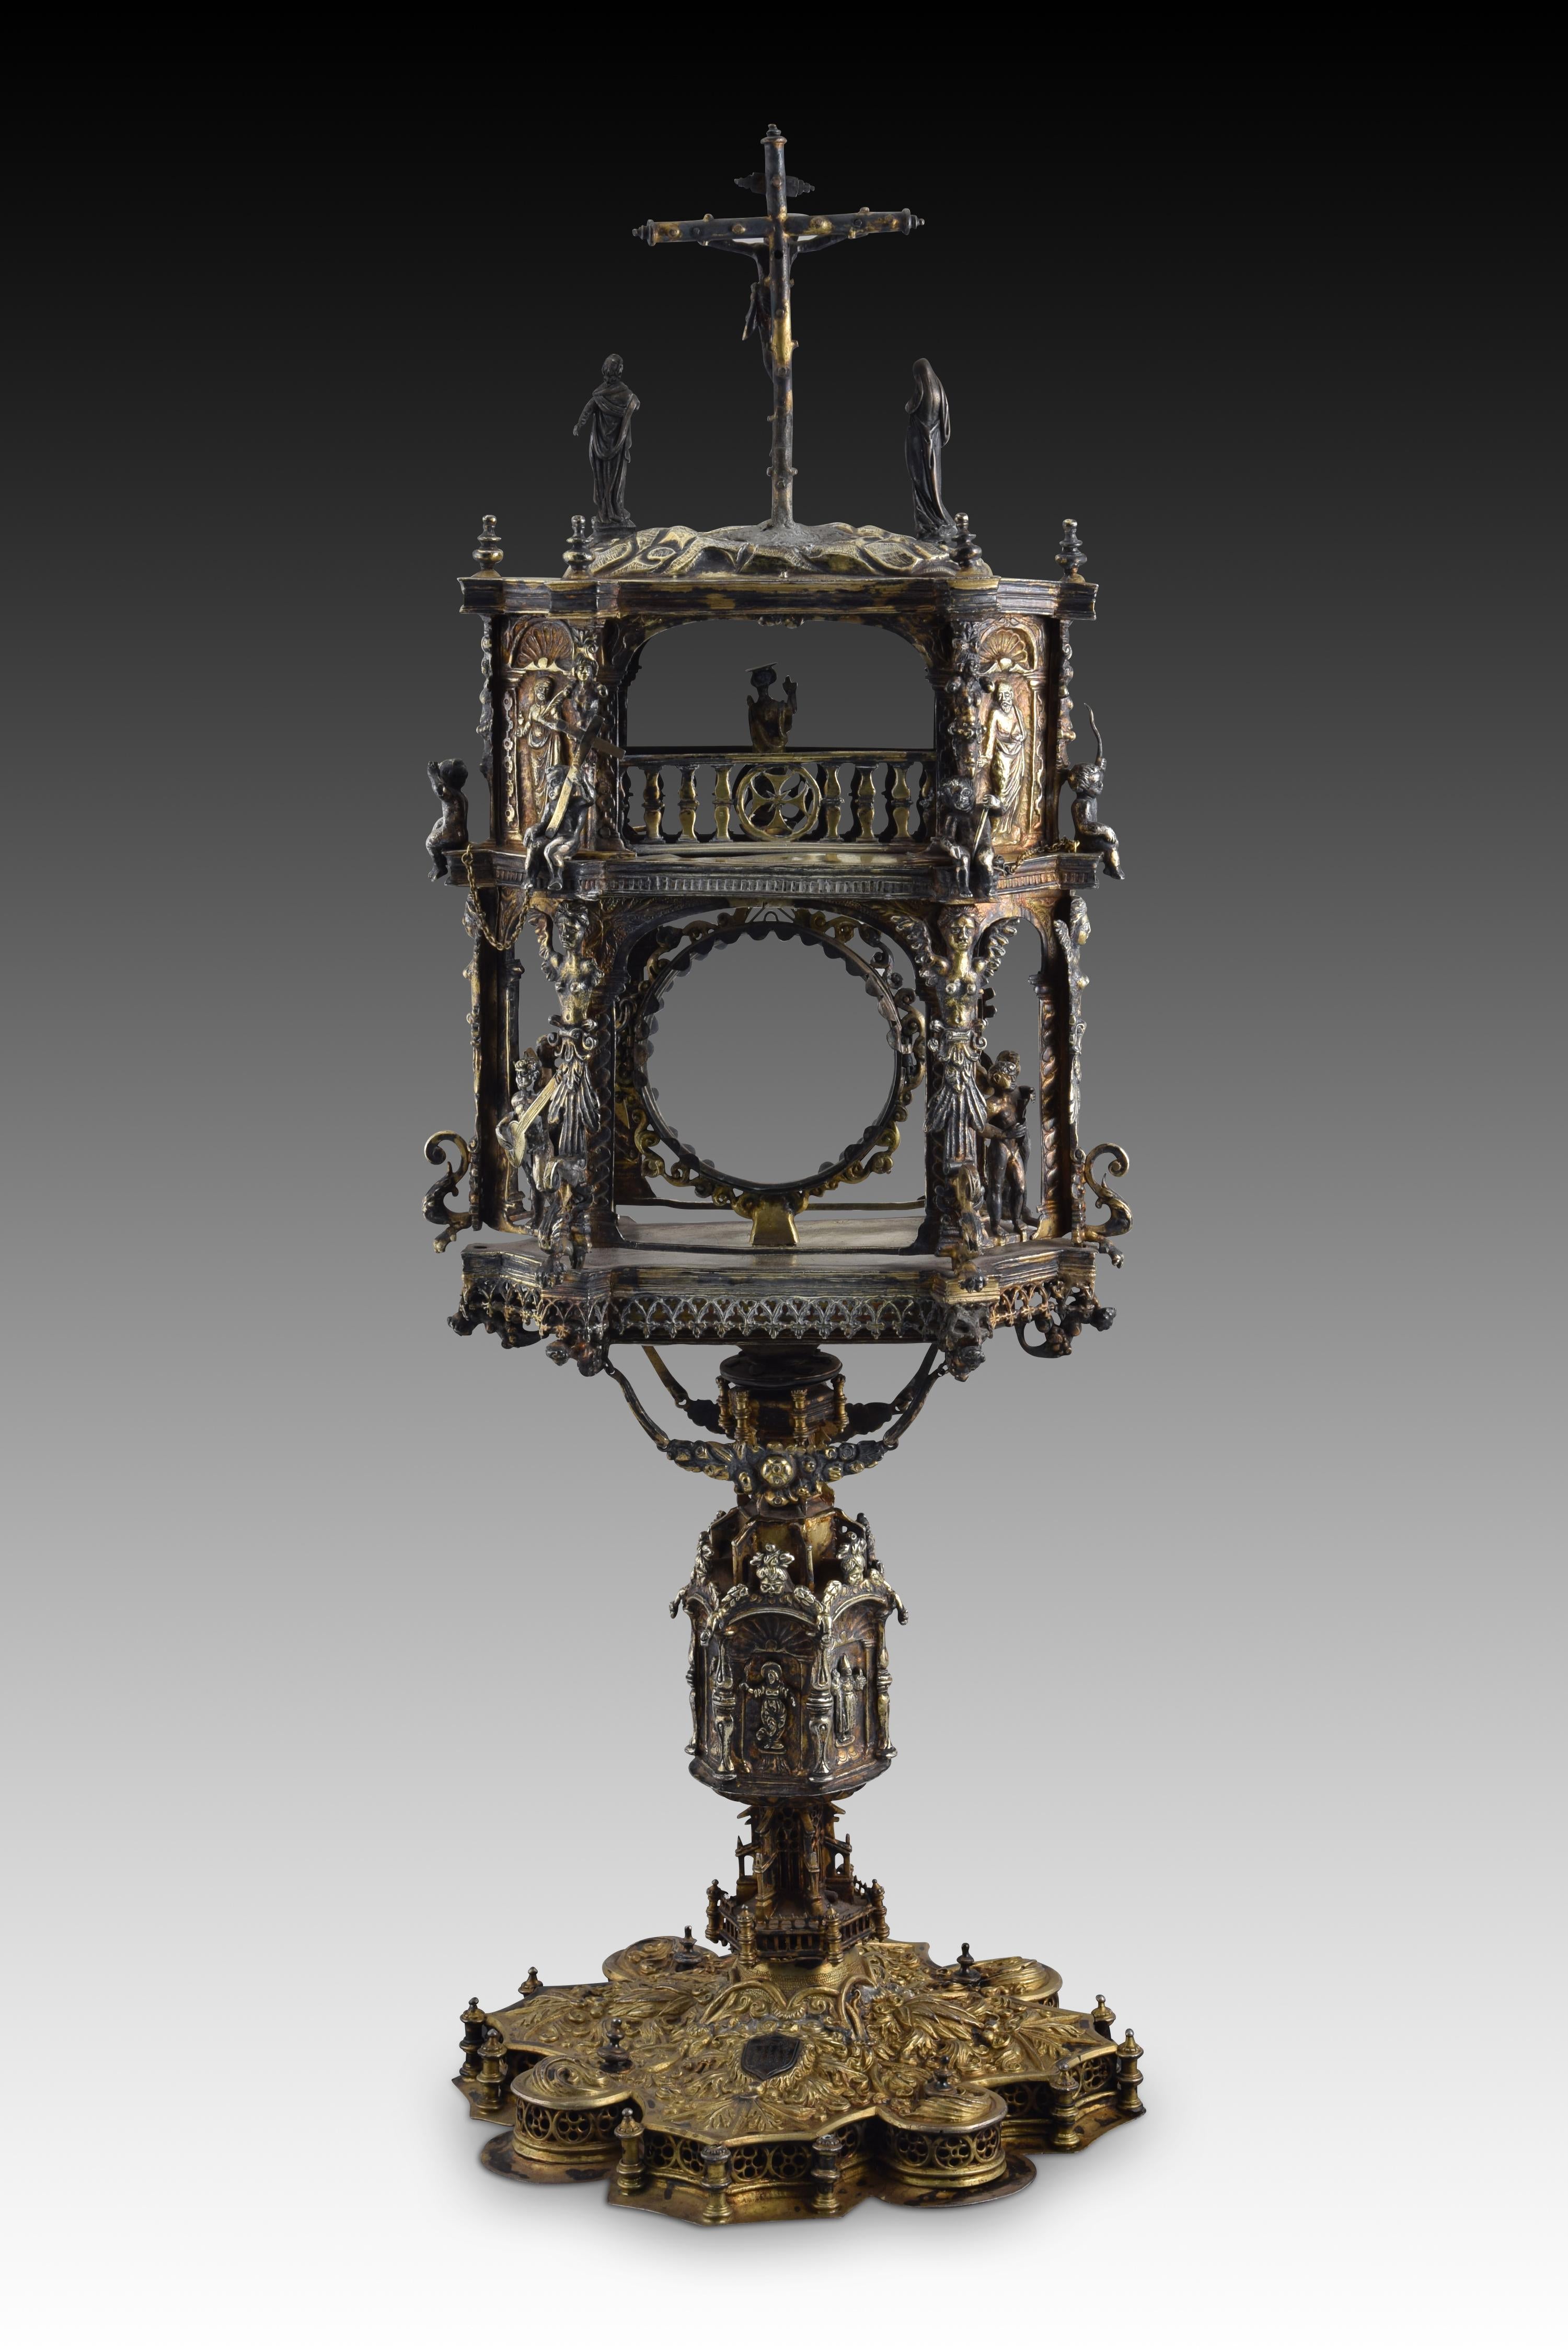 Portable temple custody. Gilded silver, glass. 16th century, possible restorations. 
Custody made of gilded silver (the finish has been lost in some points) composed of a base, an axis or stem and a two-story architectural upper structure with